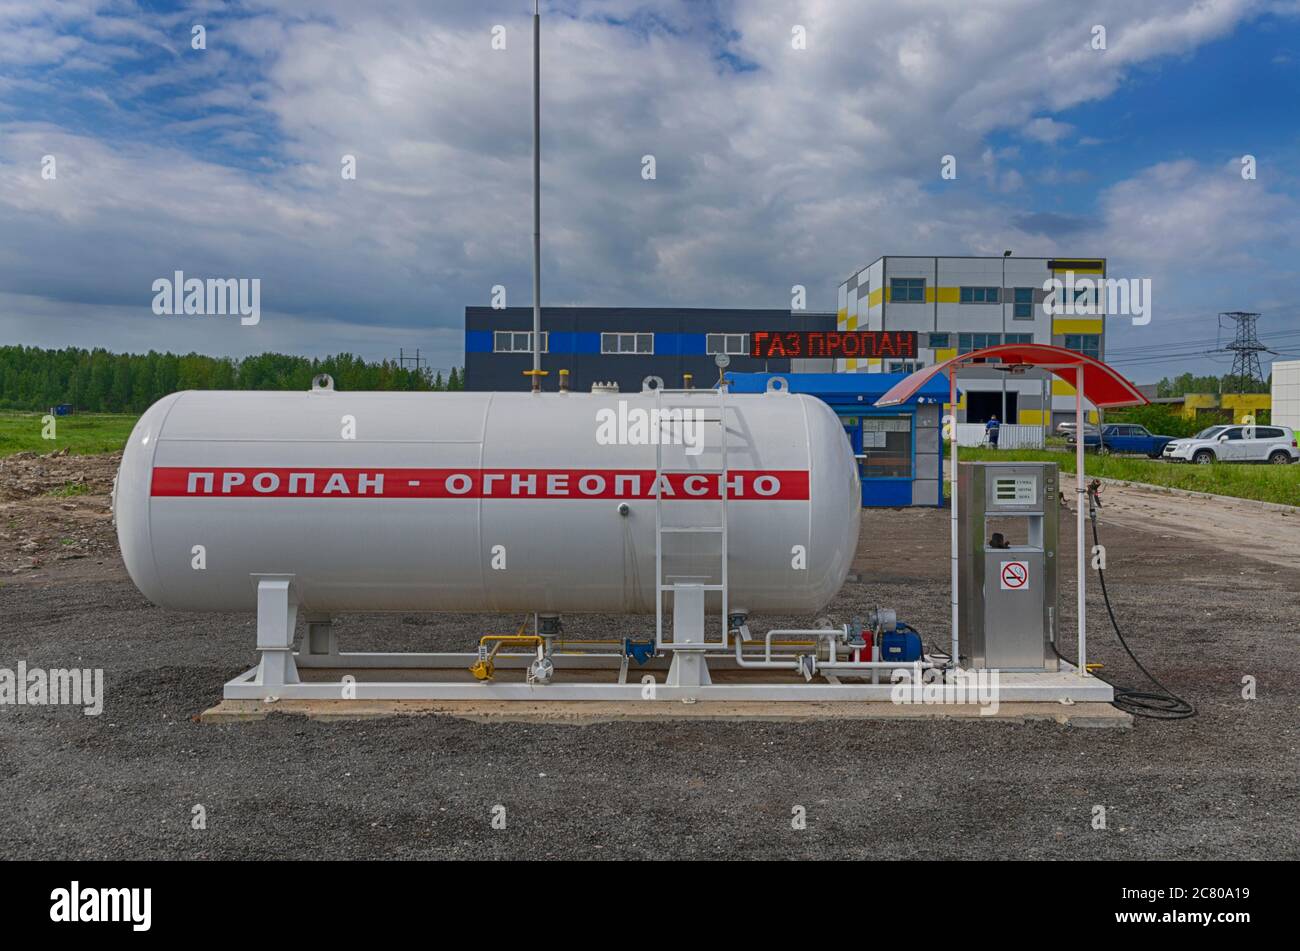 Saint Petersburg, Russia - June 7, 2020: Car gas filling station in the format of a small business with the words in Russian 'flammable' and 'propane Stock Photo